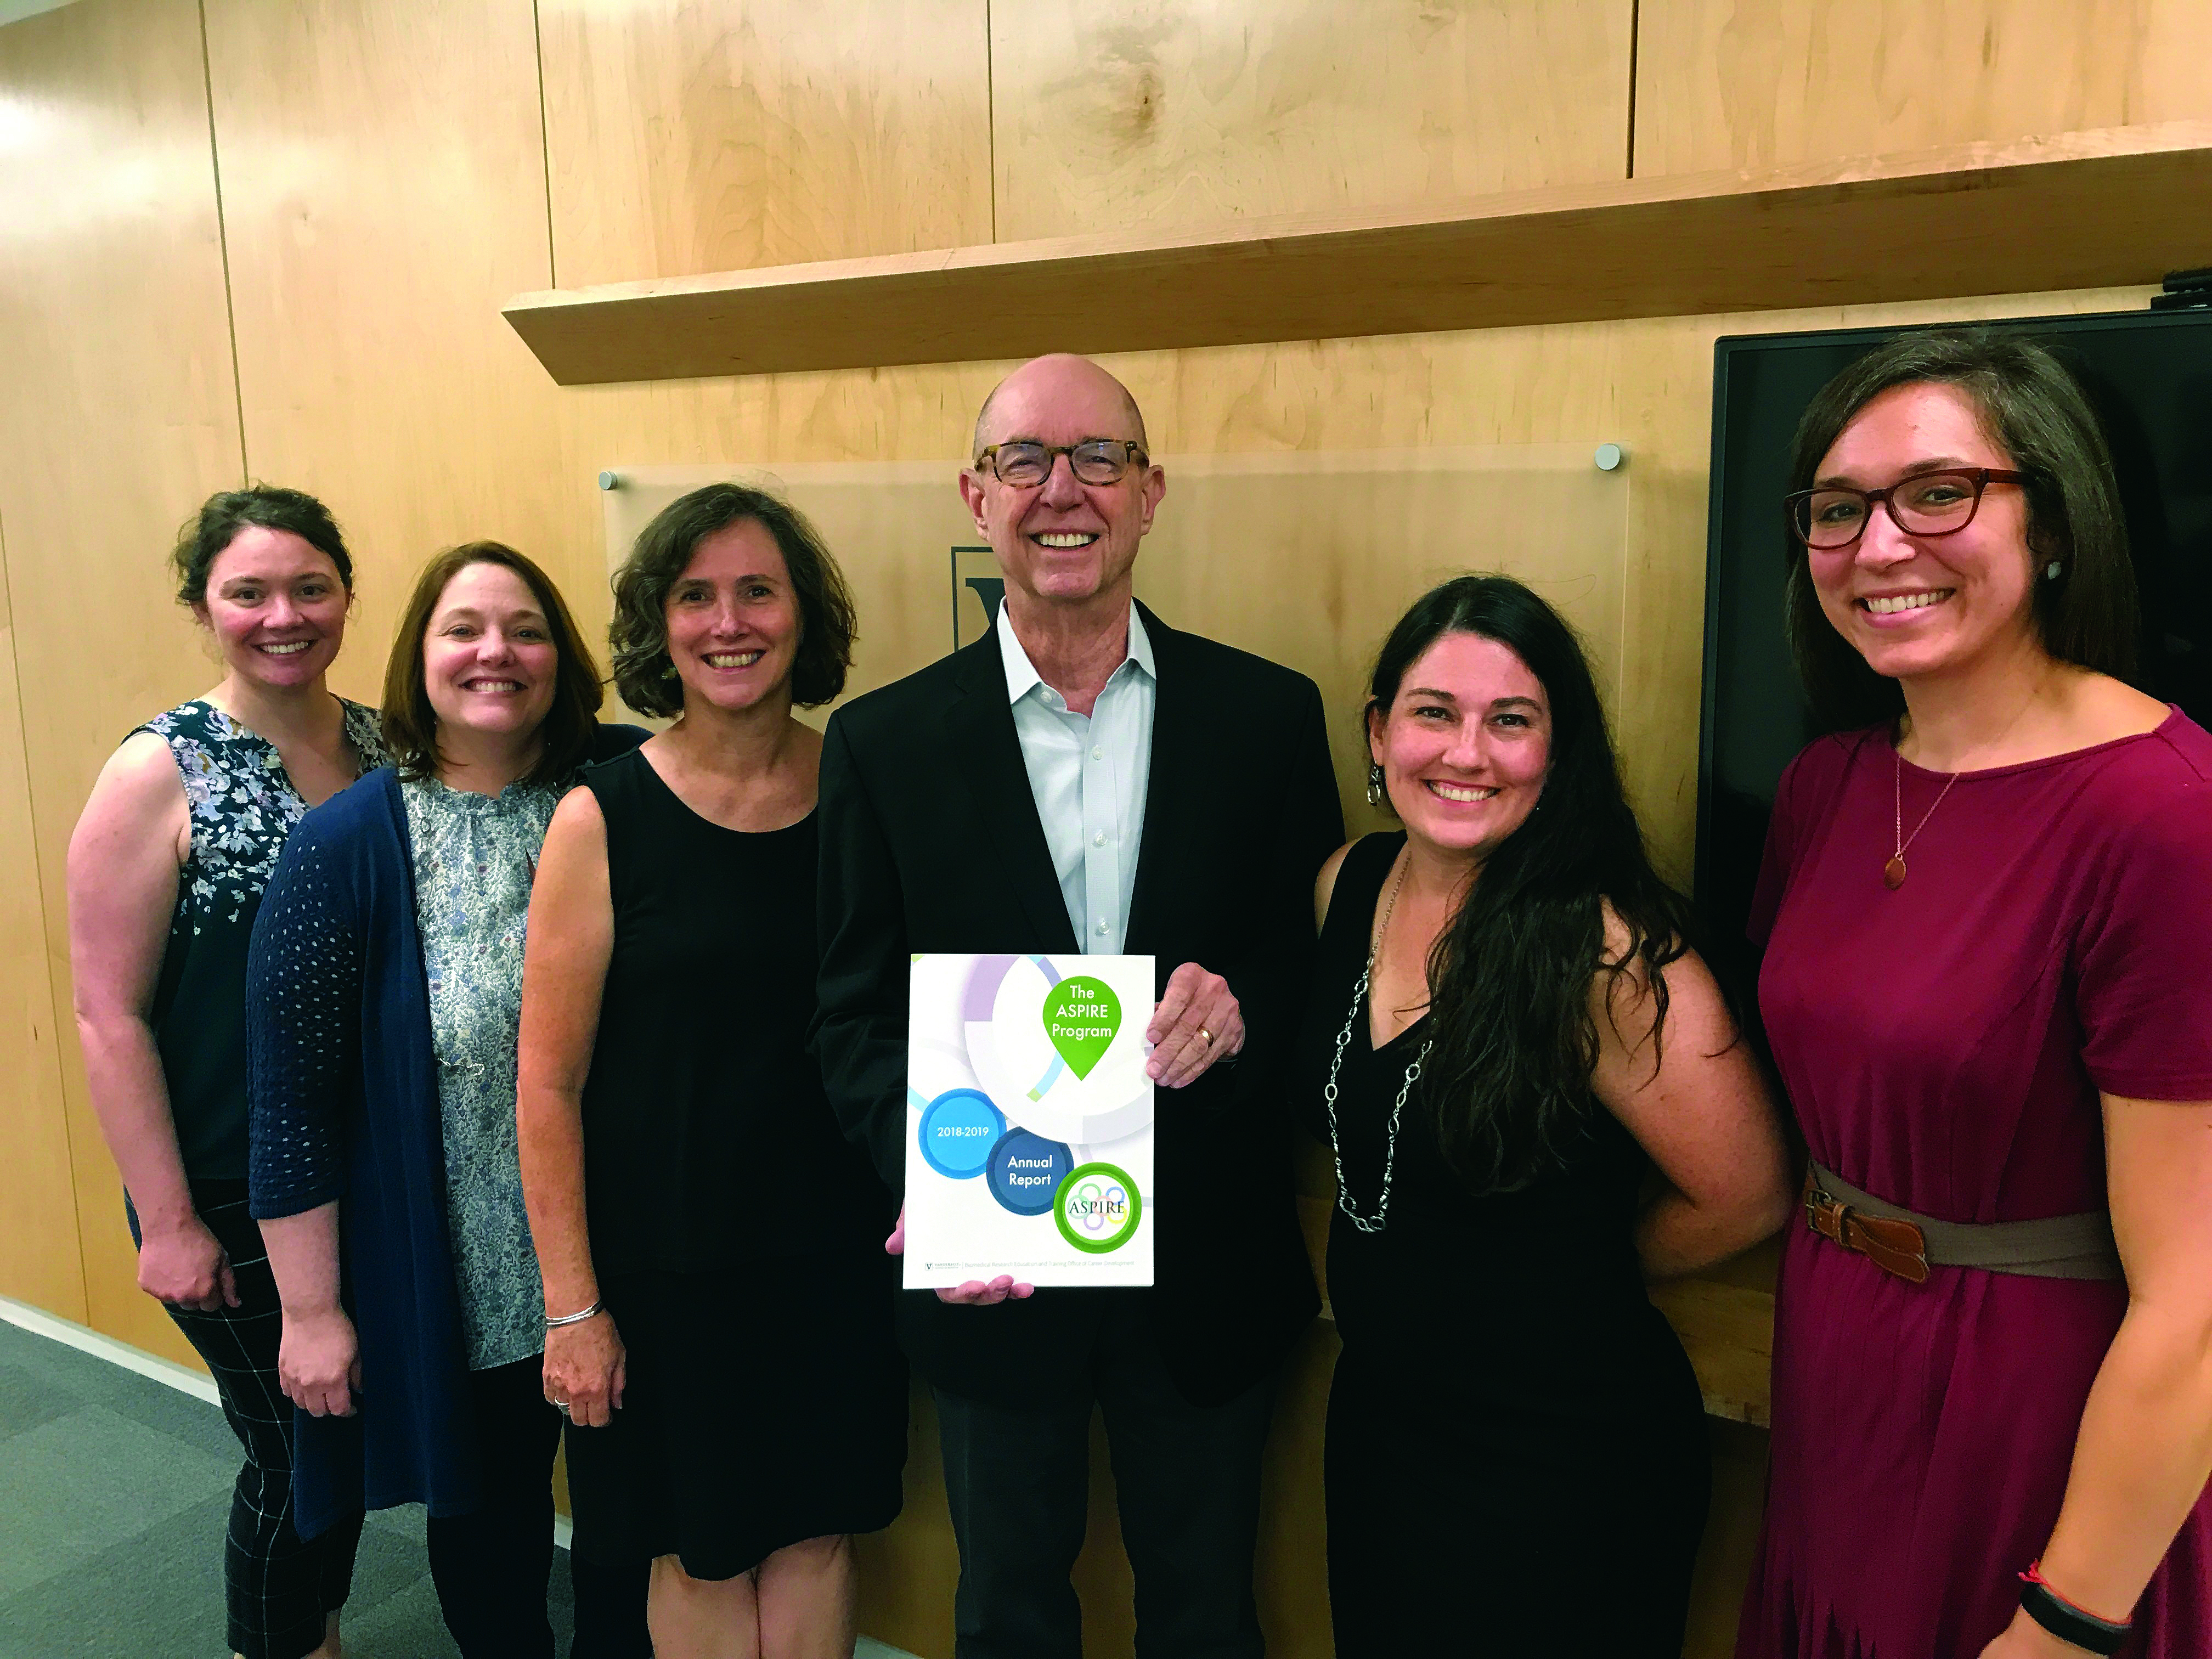 The staff of the BRET Office poses with Dean Larry Marnett, who is holding the 2018-2019 ASPIRE Annual Report. From left, Angela Zito, Kim Petrie, Kathleen Gould, Larry Marnett, Ashley Brady, and Kate Stuart.